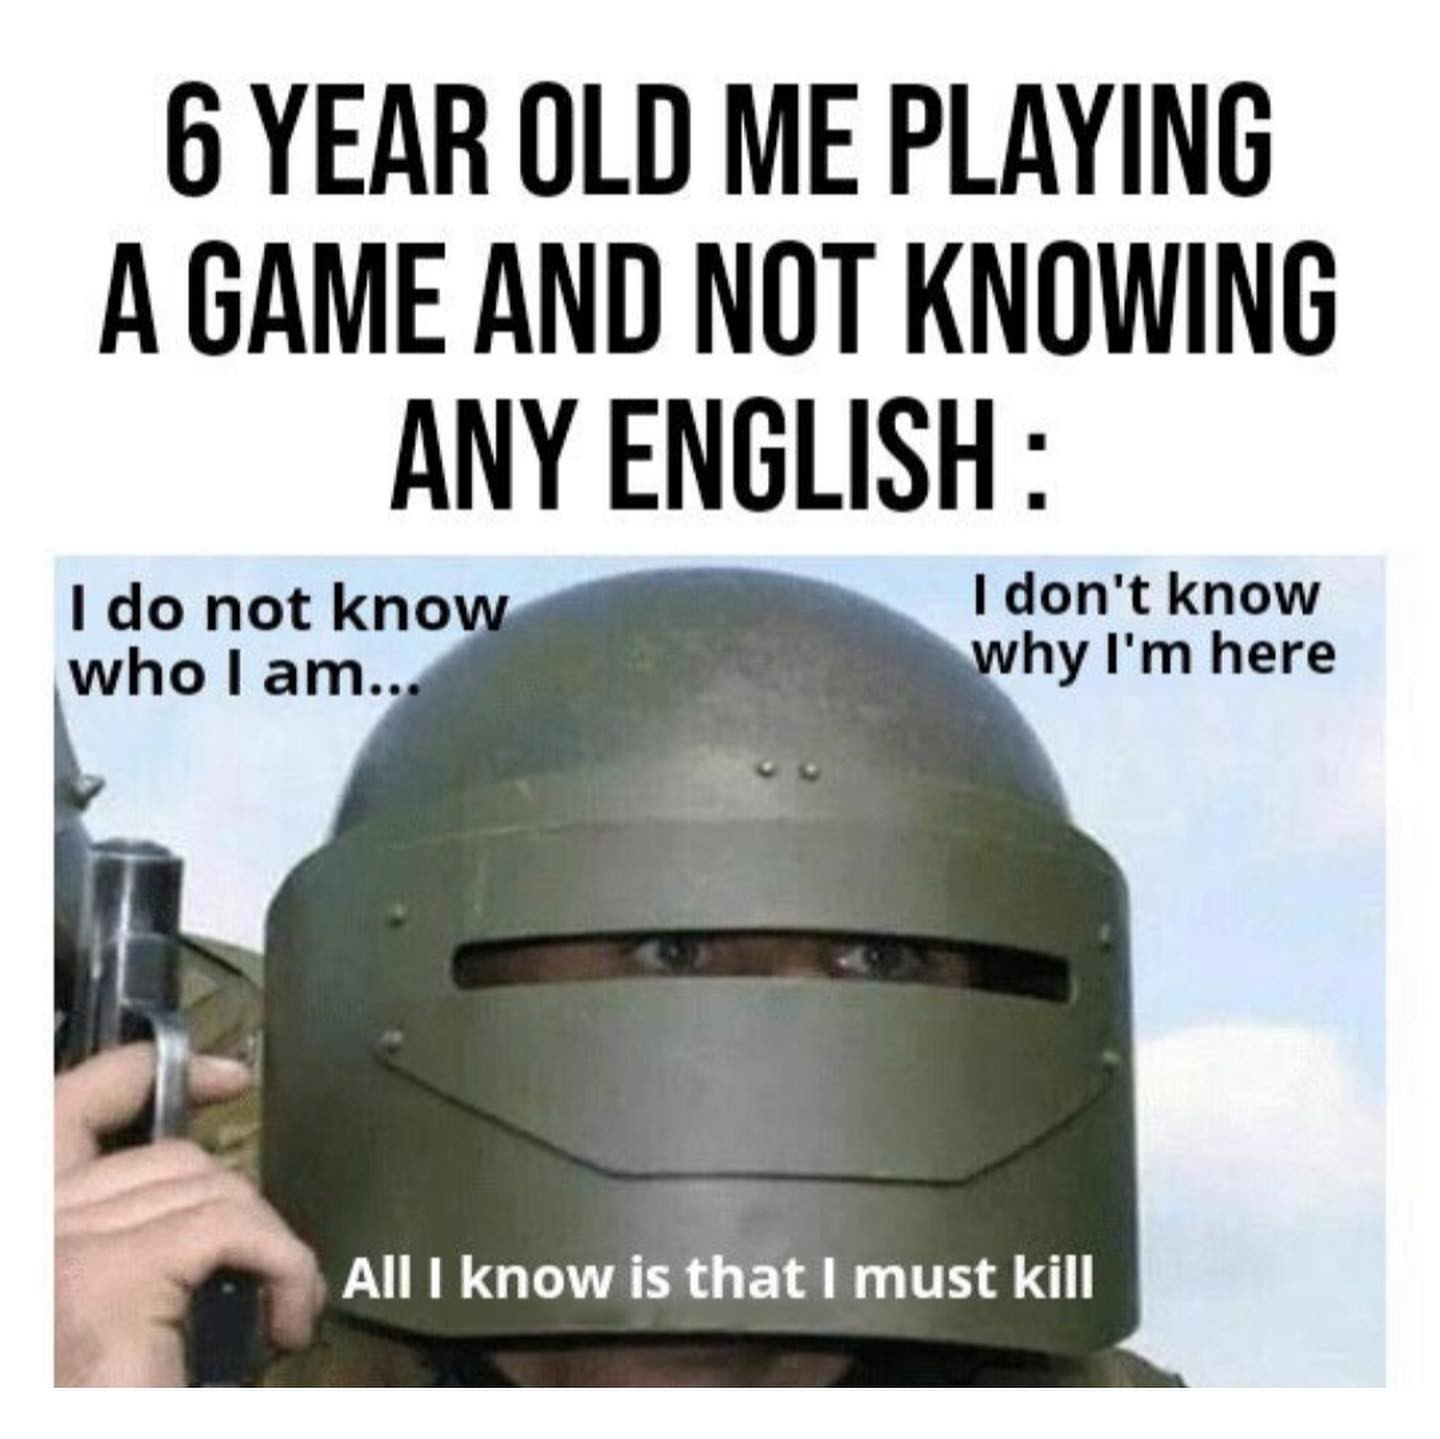 6 year old me playing a game and not knowing any English: I do not know who I am... I don't know why I'm here. All I know is that I must kill.